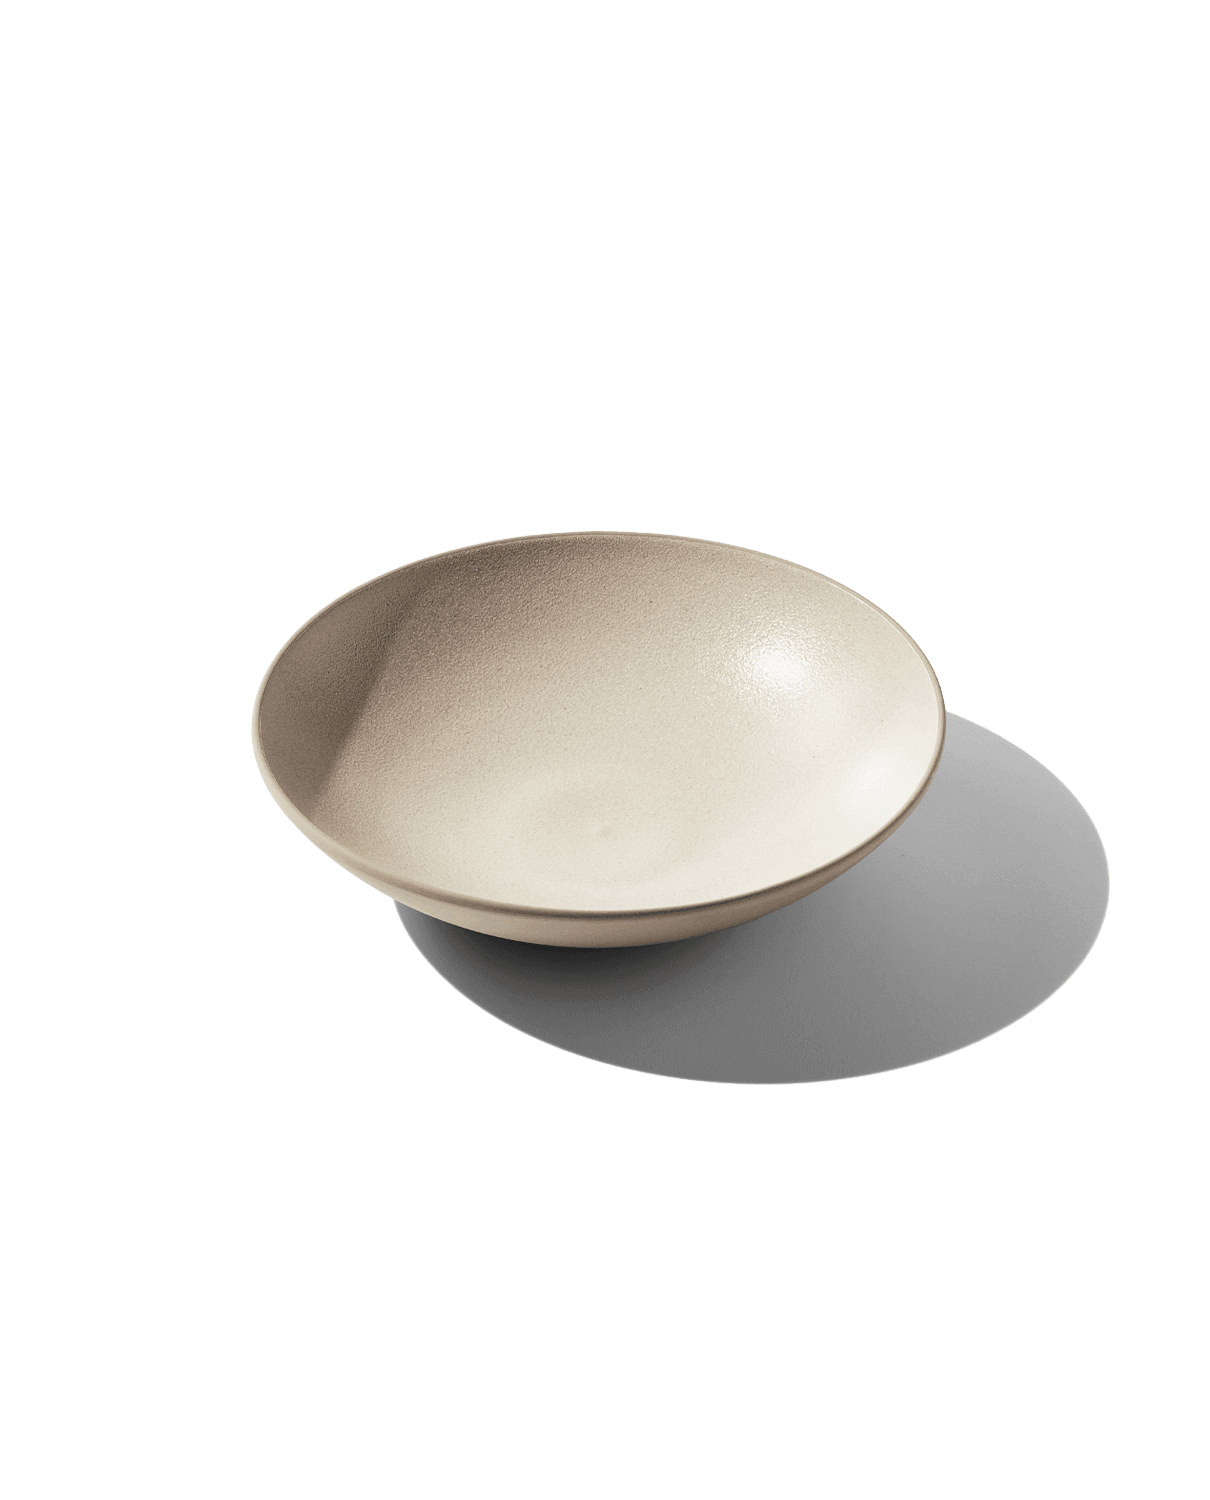 https://cdn.shopify.com/s/files/1/2304/7781/products/Open_Bowl_Dune.png?v=1660247650